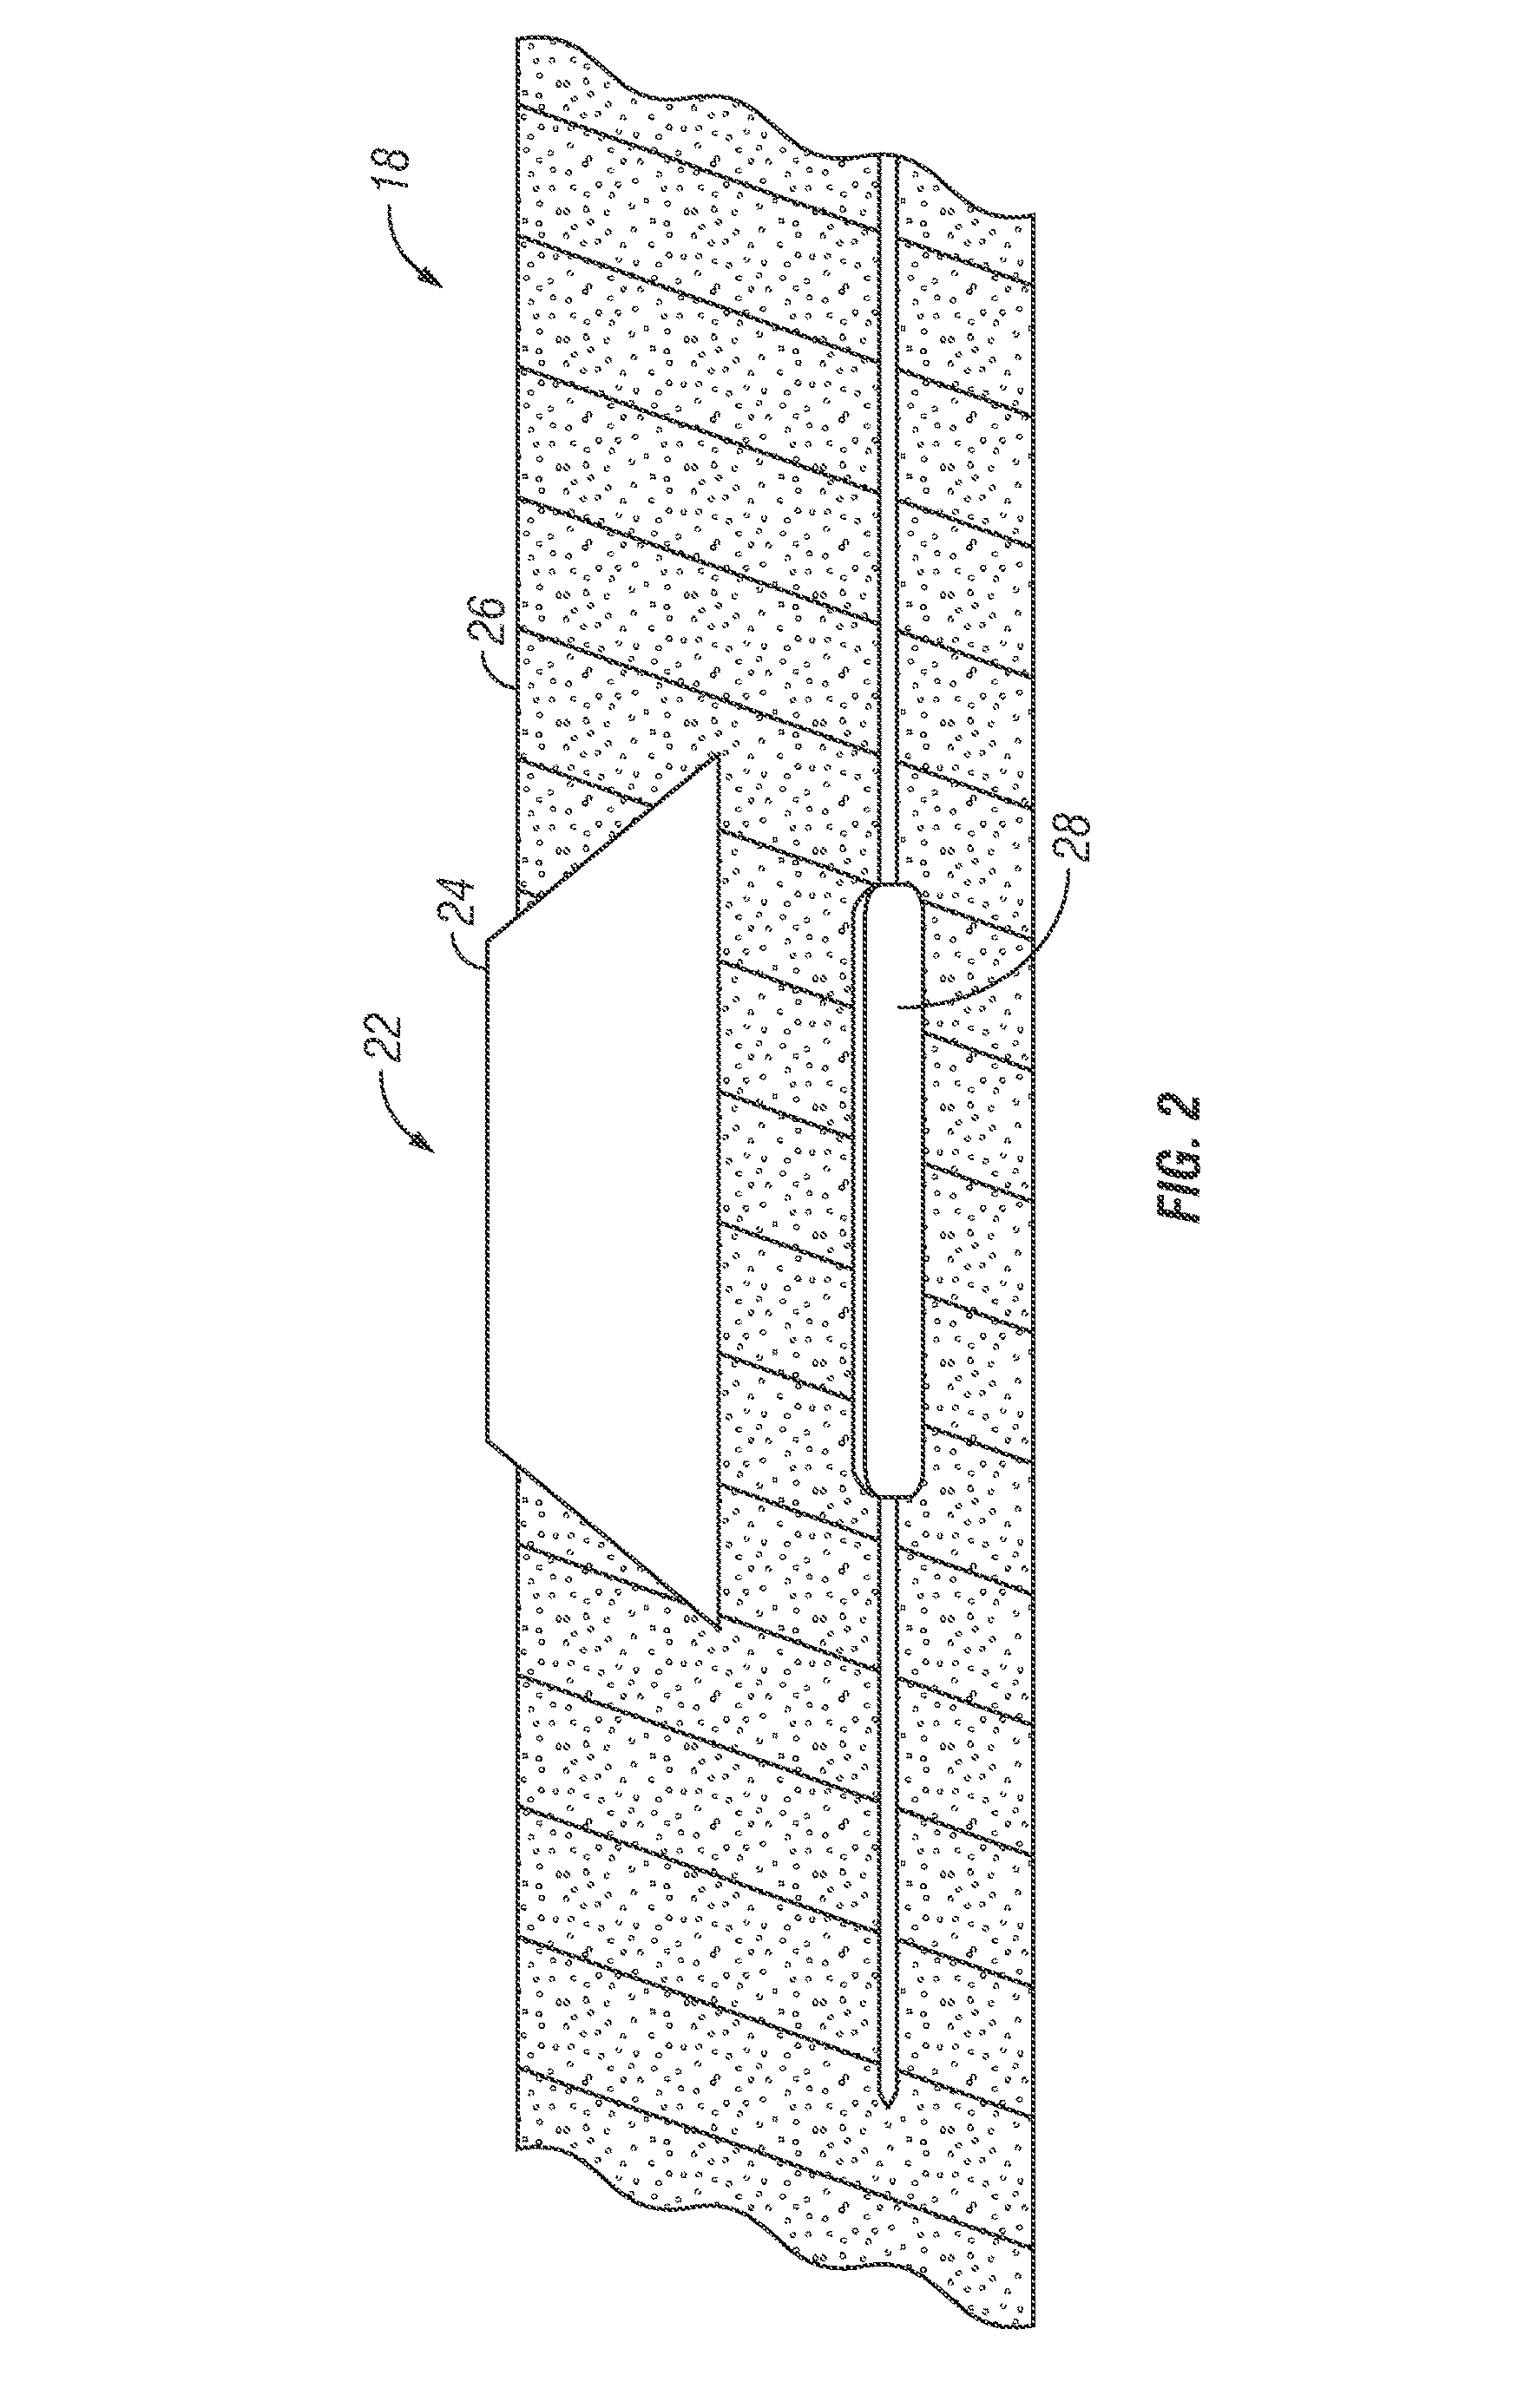 System and method for providing traffic congestion relief using dynamic lighted road lane markings